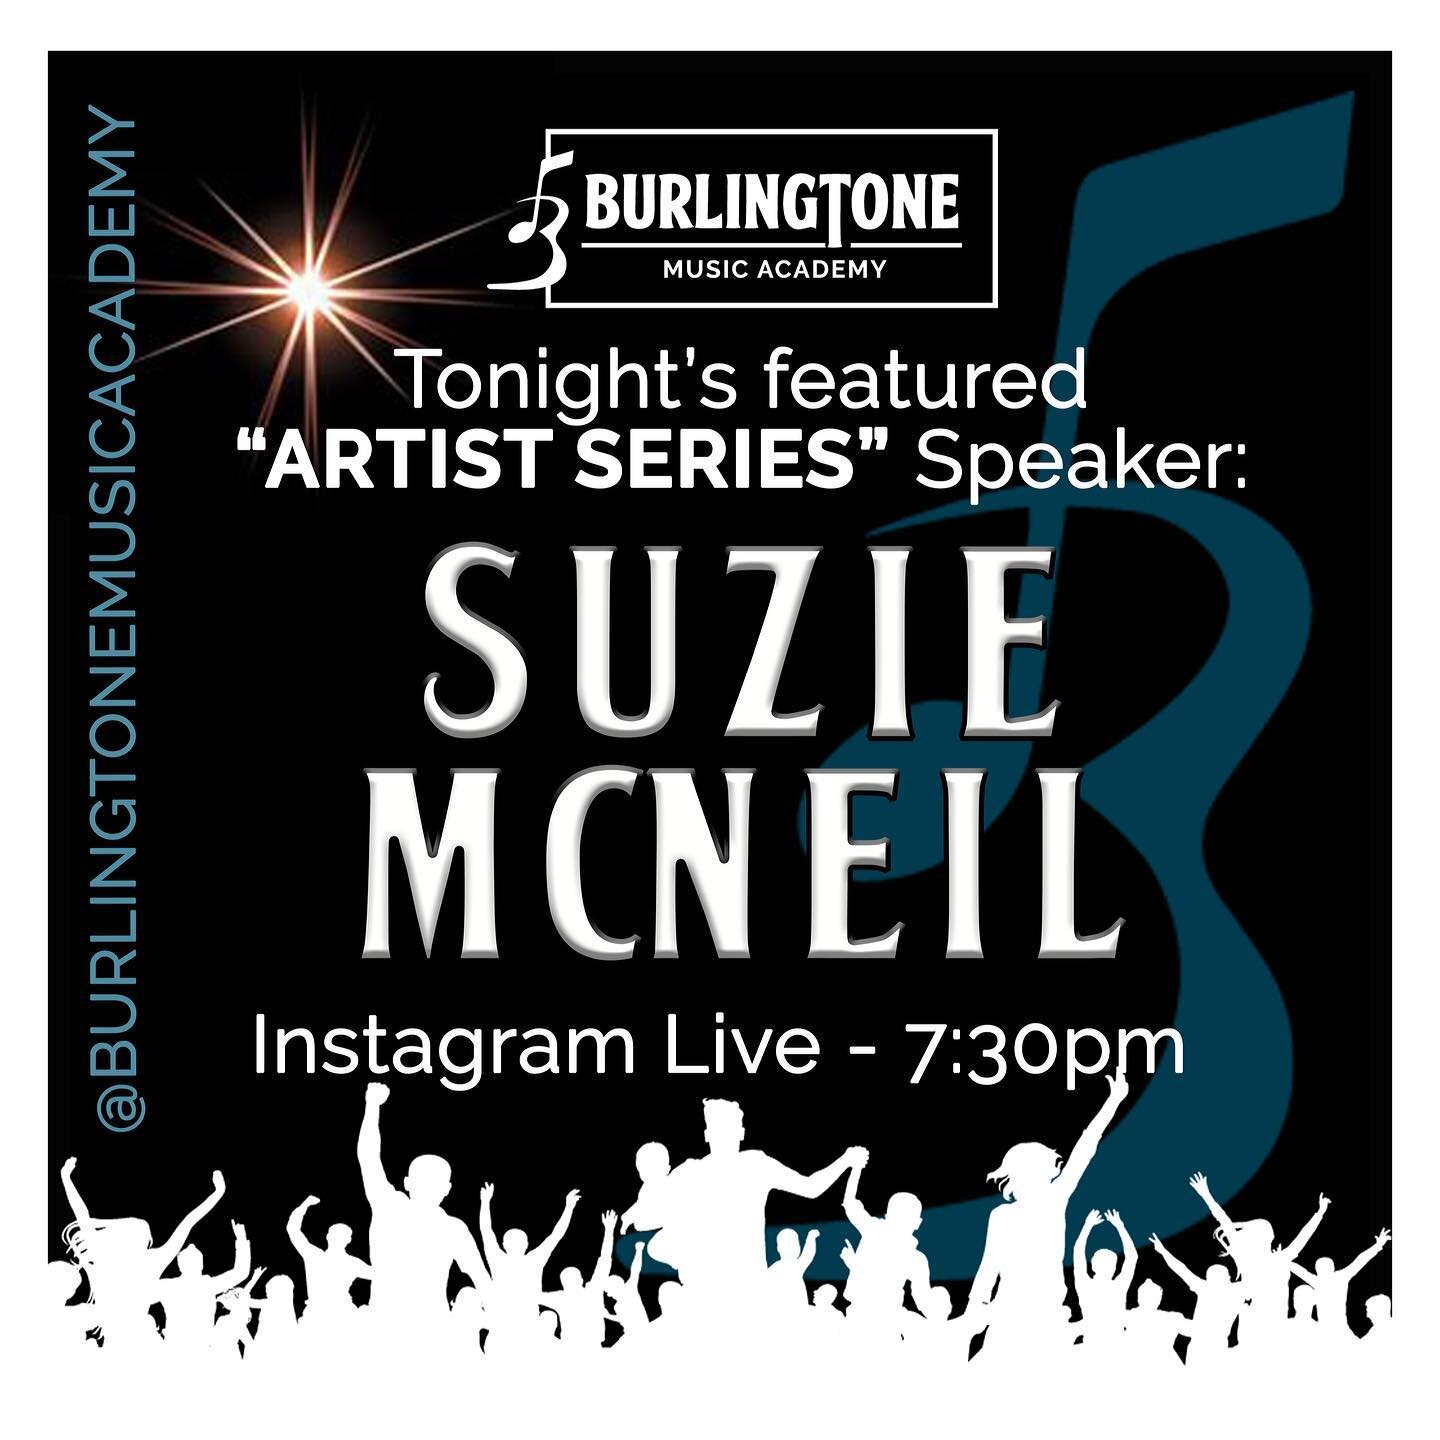 Tonight&rsquo;s #ArtistSeries featured speaker is our founder and resident instructor @thesuziemcneil ‼️
Join her tonight on our Instagram page LIVE at 7:30pm, where she will talk about her experience in the music business, as well as answer any ques